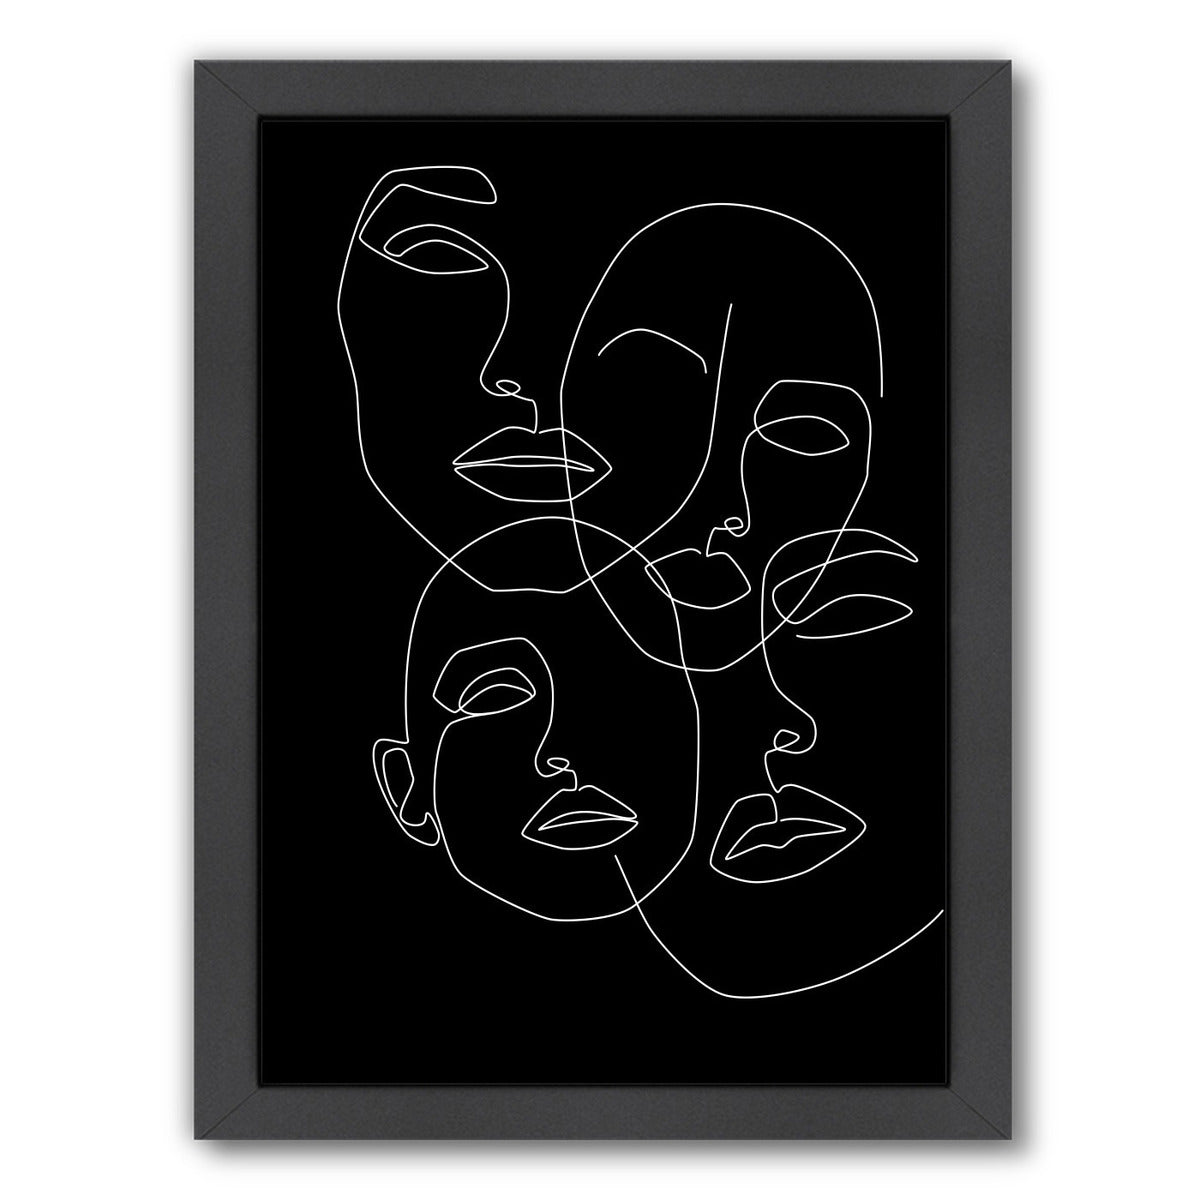 In The Dark by Explicit Design Framed Print - Americanflat